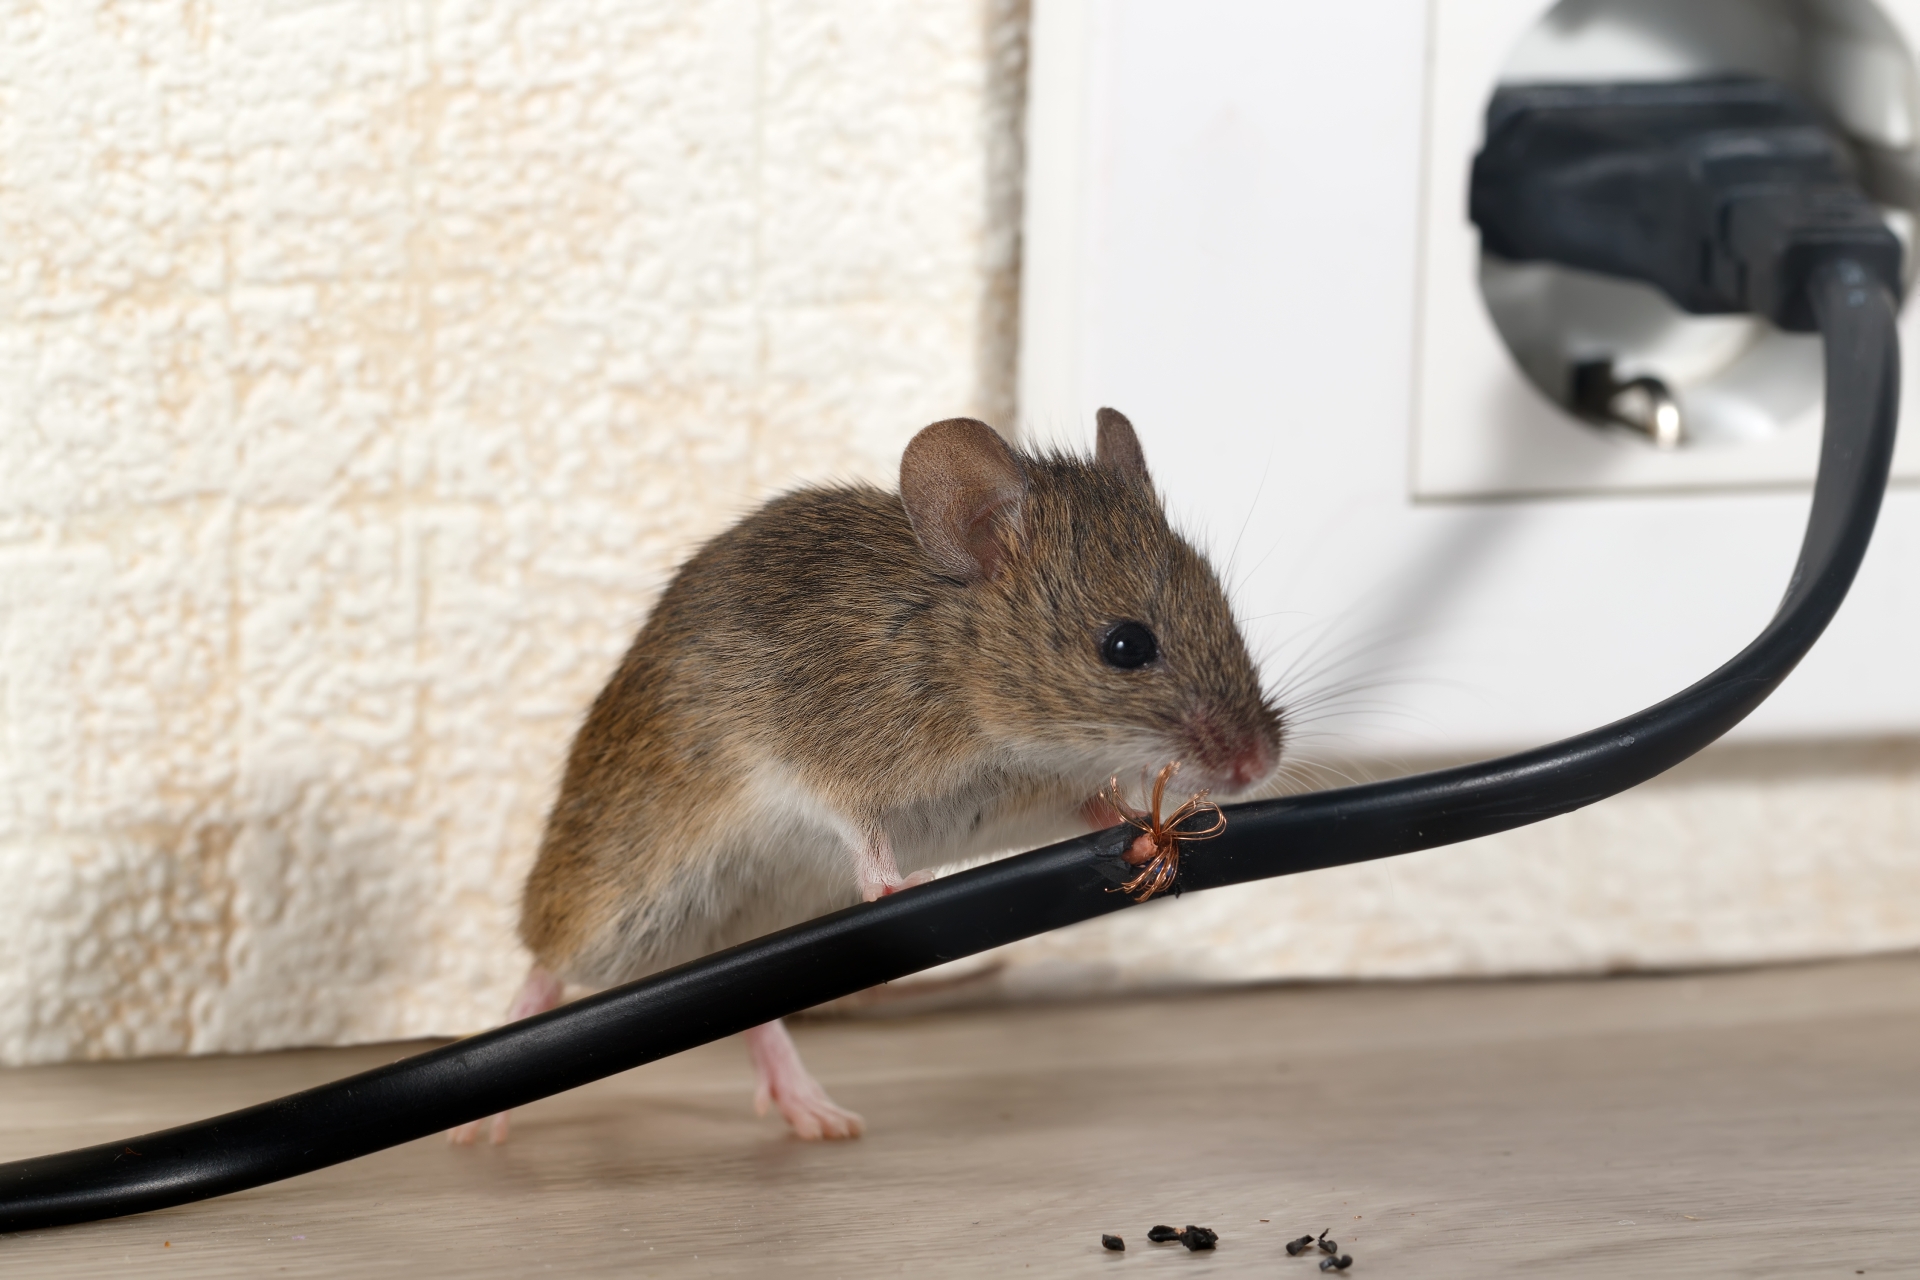 Mice Infestation, Pest Control in Clerkenwell, Finsbury, Barbican, EC1. Call Now 020 8166 9746